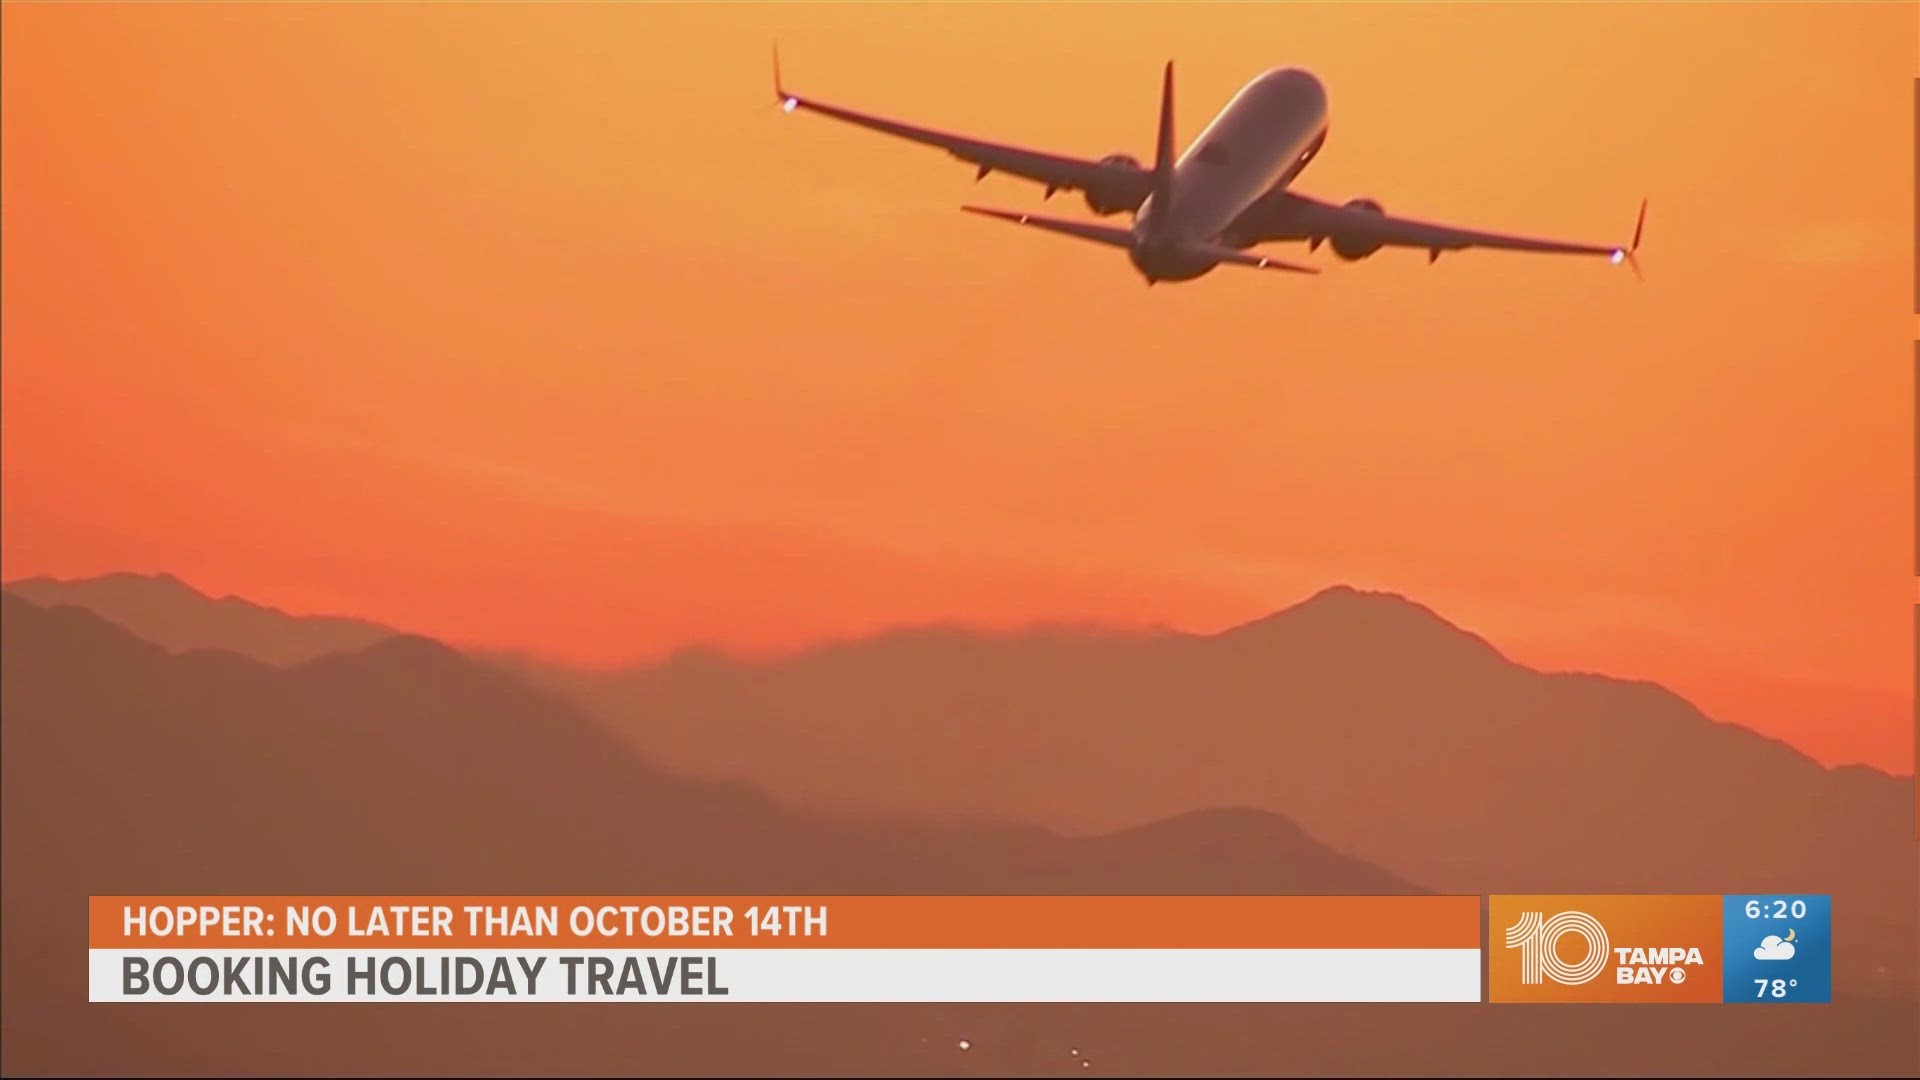 Surge prices will kick in around Oct. 14, so booking your travel sooner rather than later will save you money.